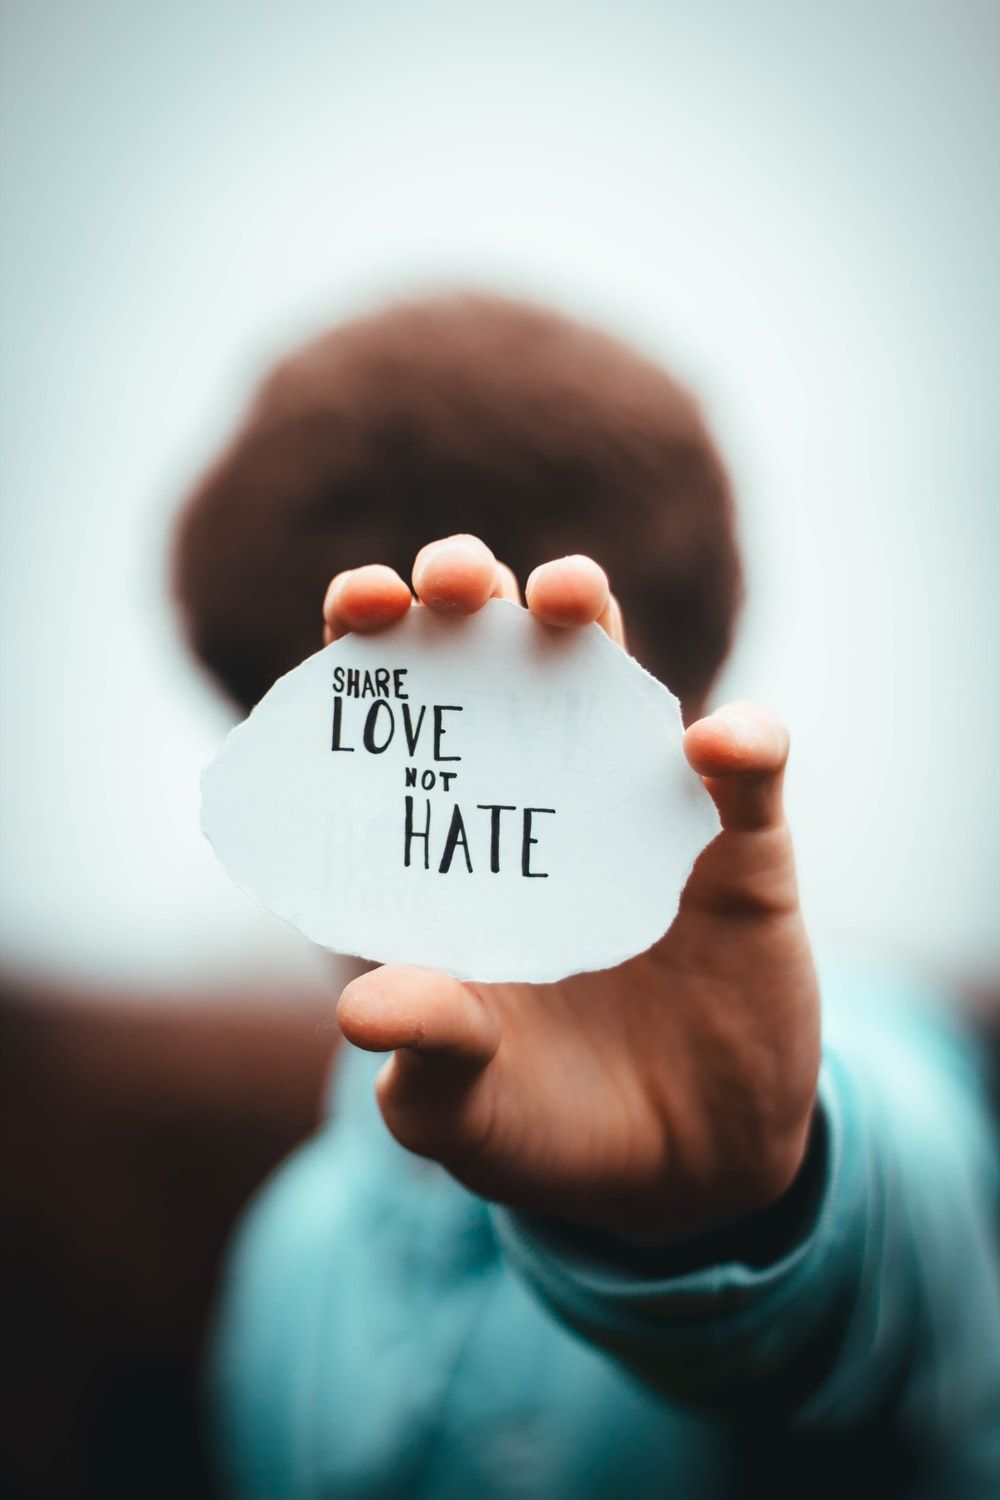 [HQ] Hate Picture. Download Free Image